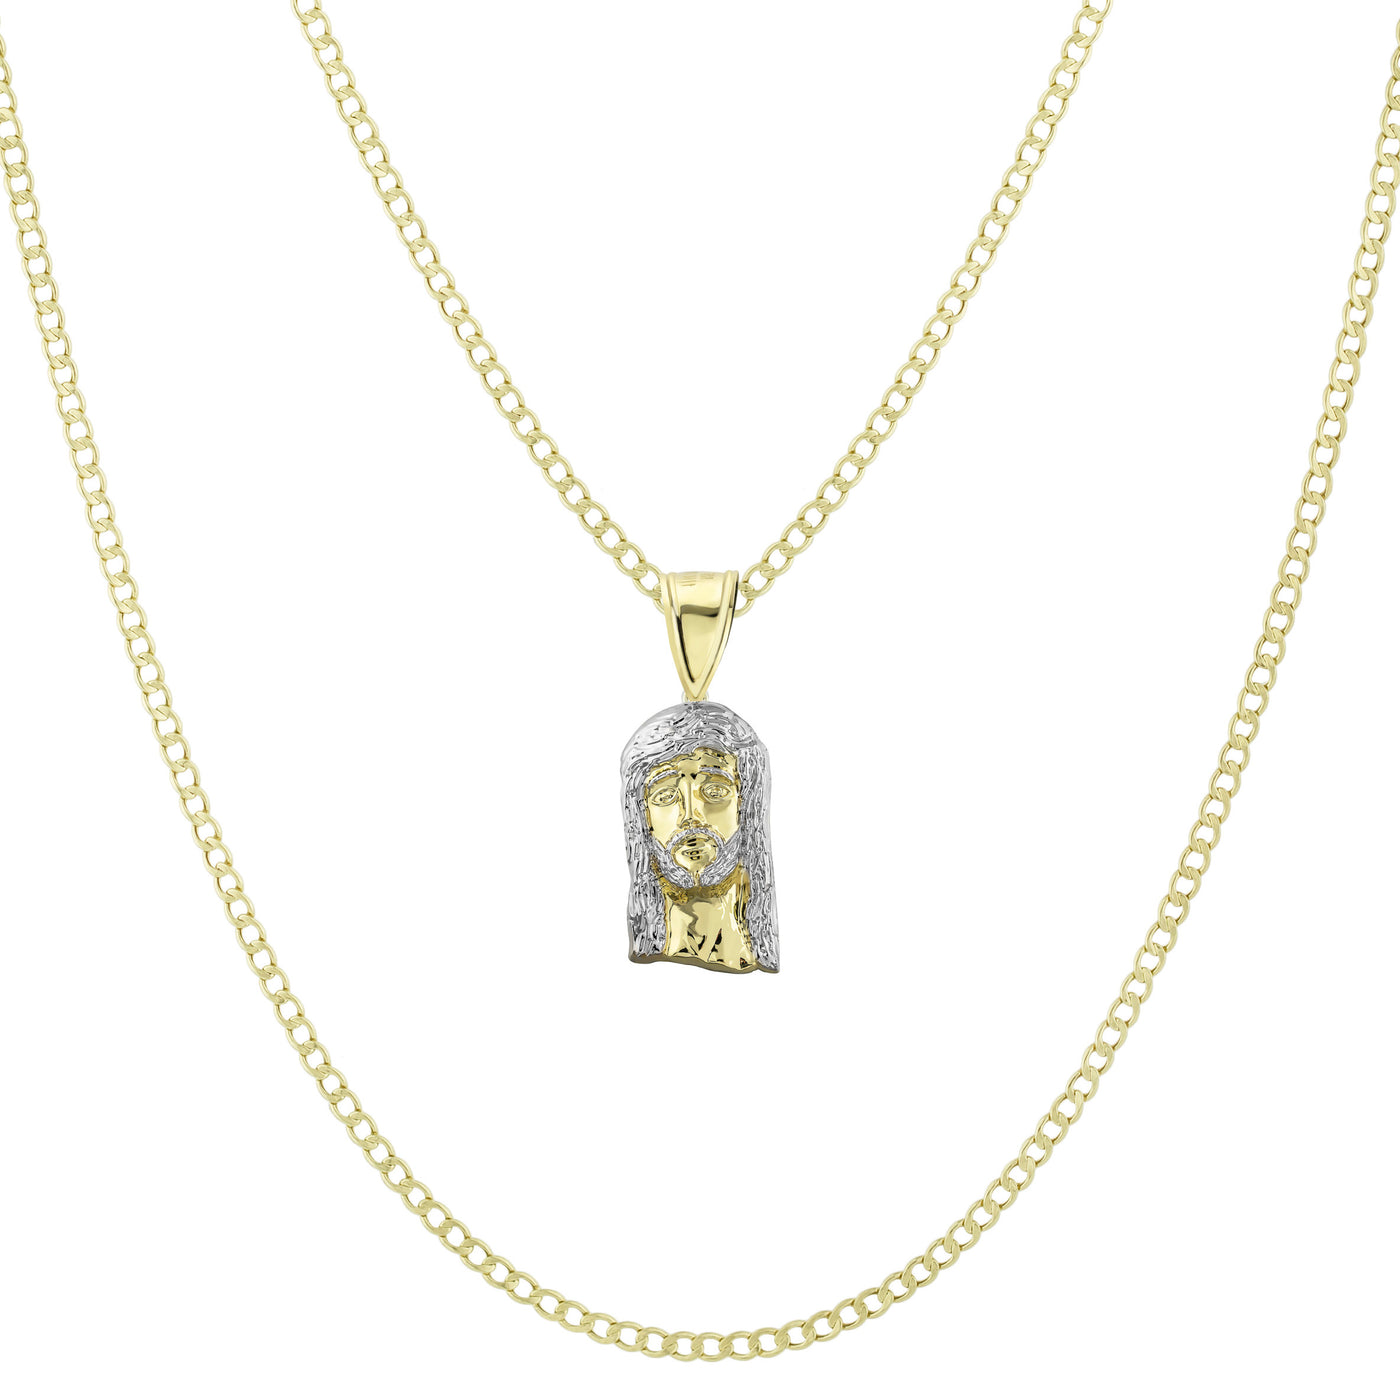 1 1/4" Face of Jesus Pendant & Chain Necklace Set 10K Yellow White Gold